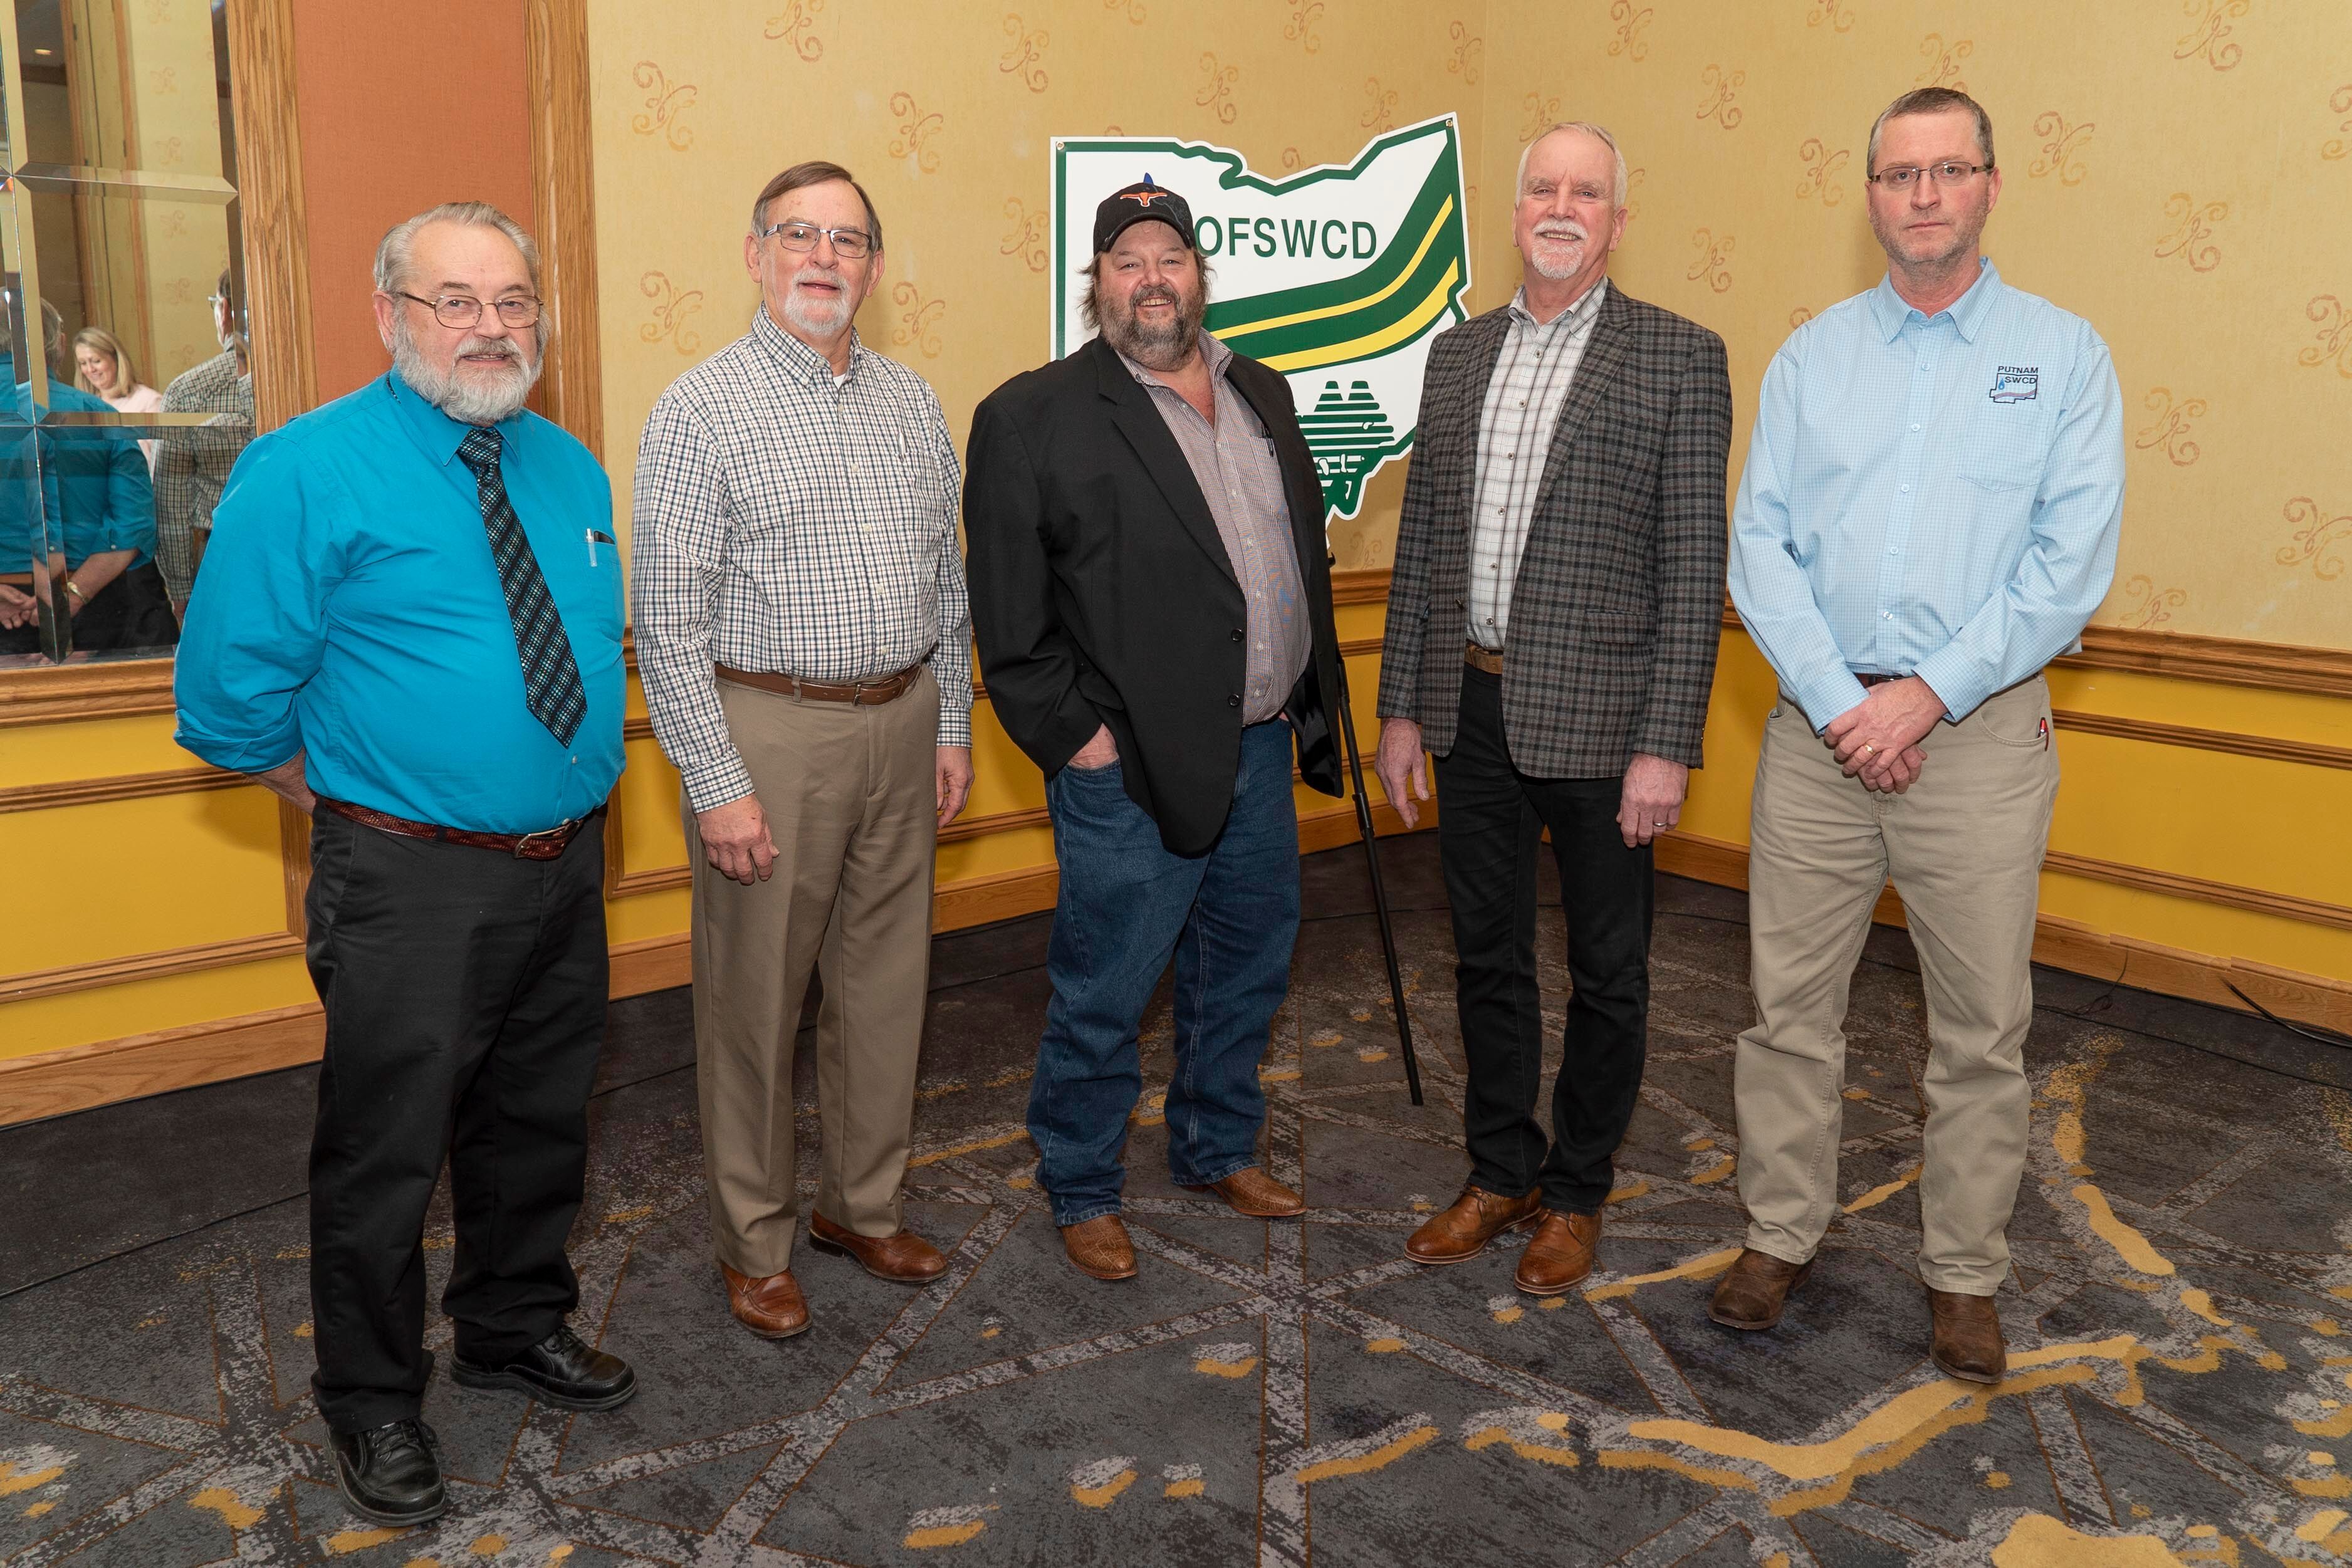 OFSWCD Officers Elected